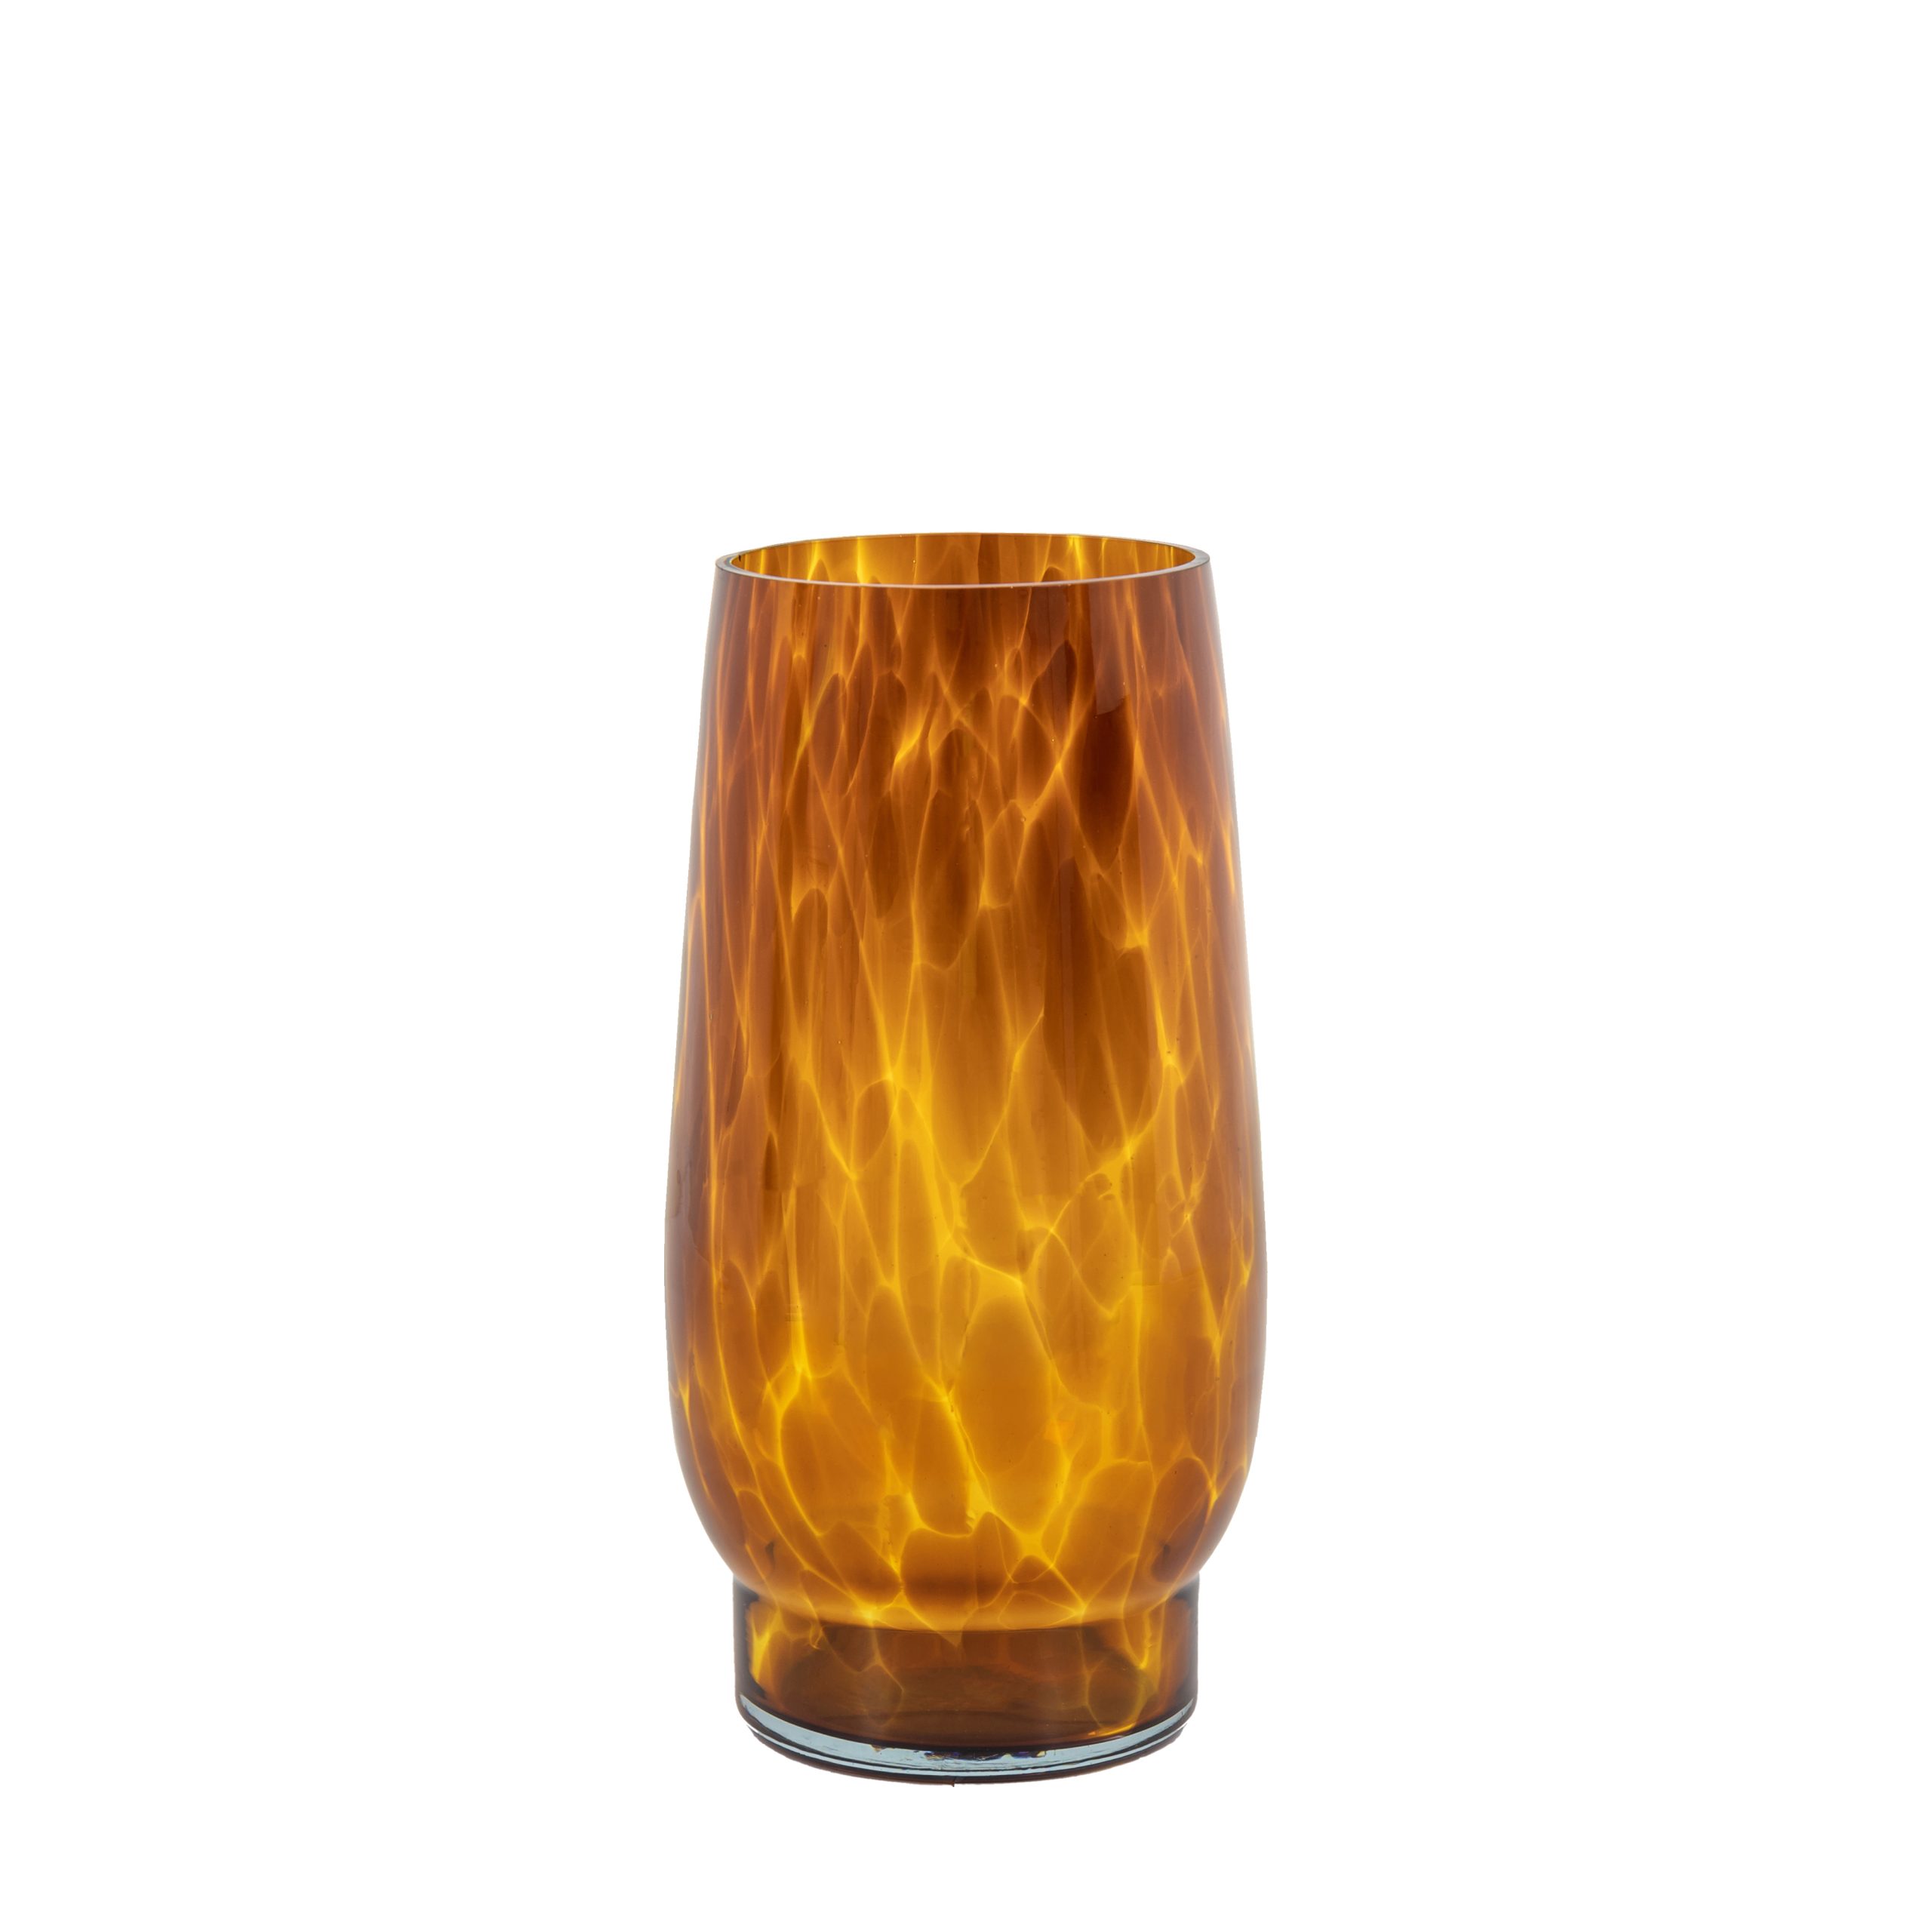 Gallery Direct Lola Vase Small Amber